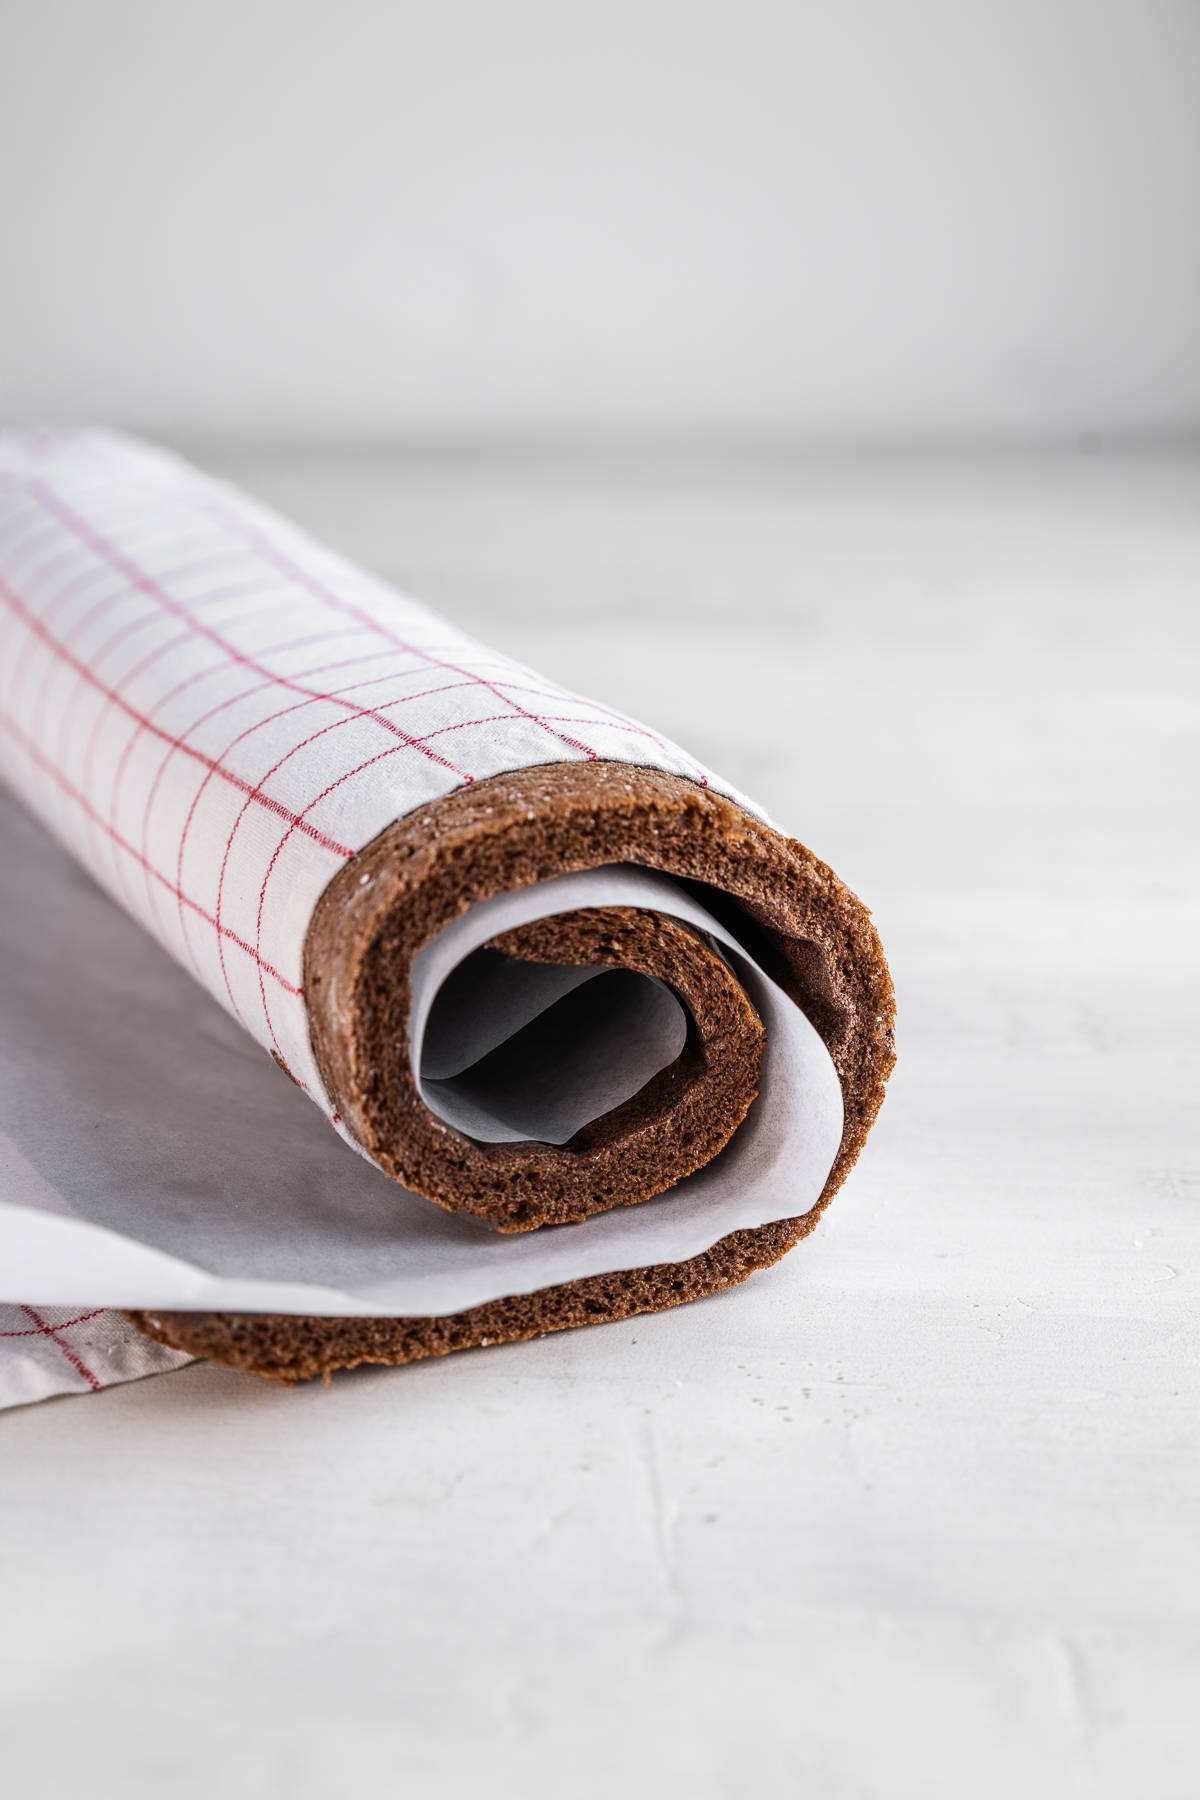 Chocolate sponge rolled in a kitchen towel and parchment paper.